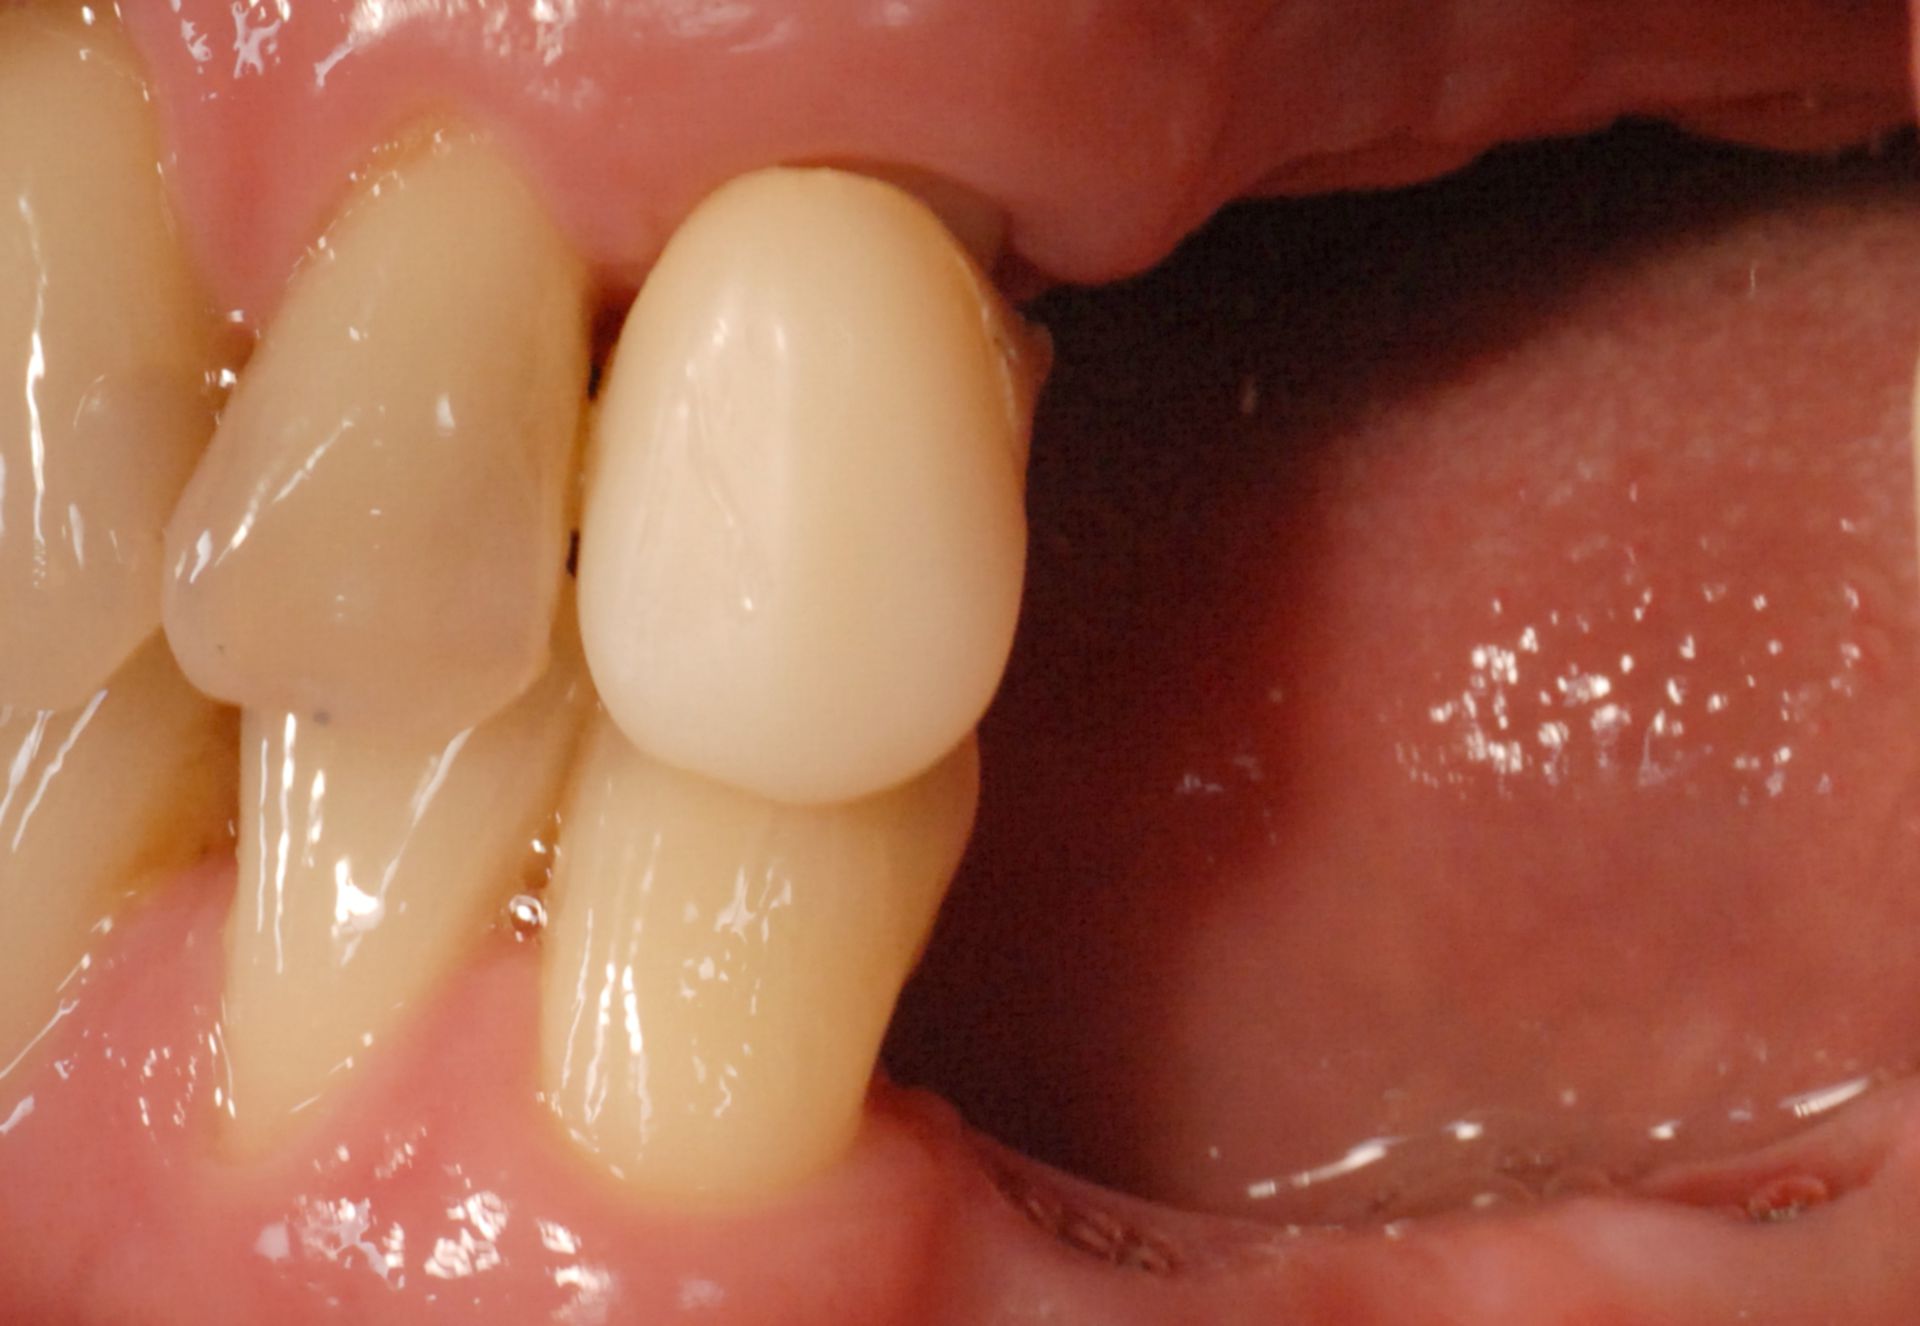 Tooth gaps in upper and lower jaw